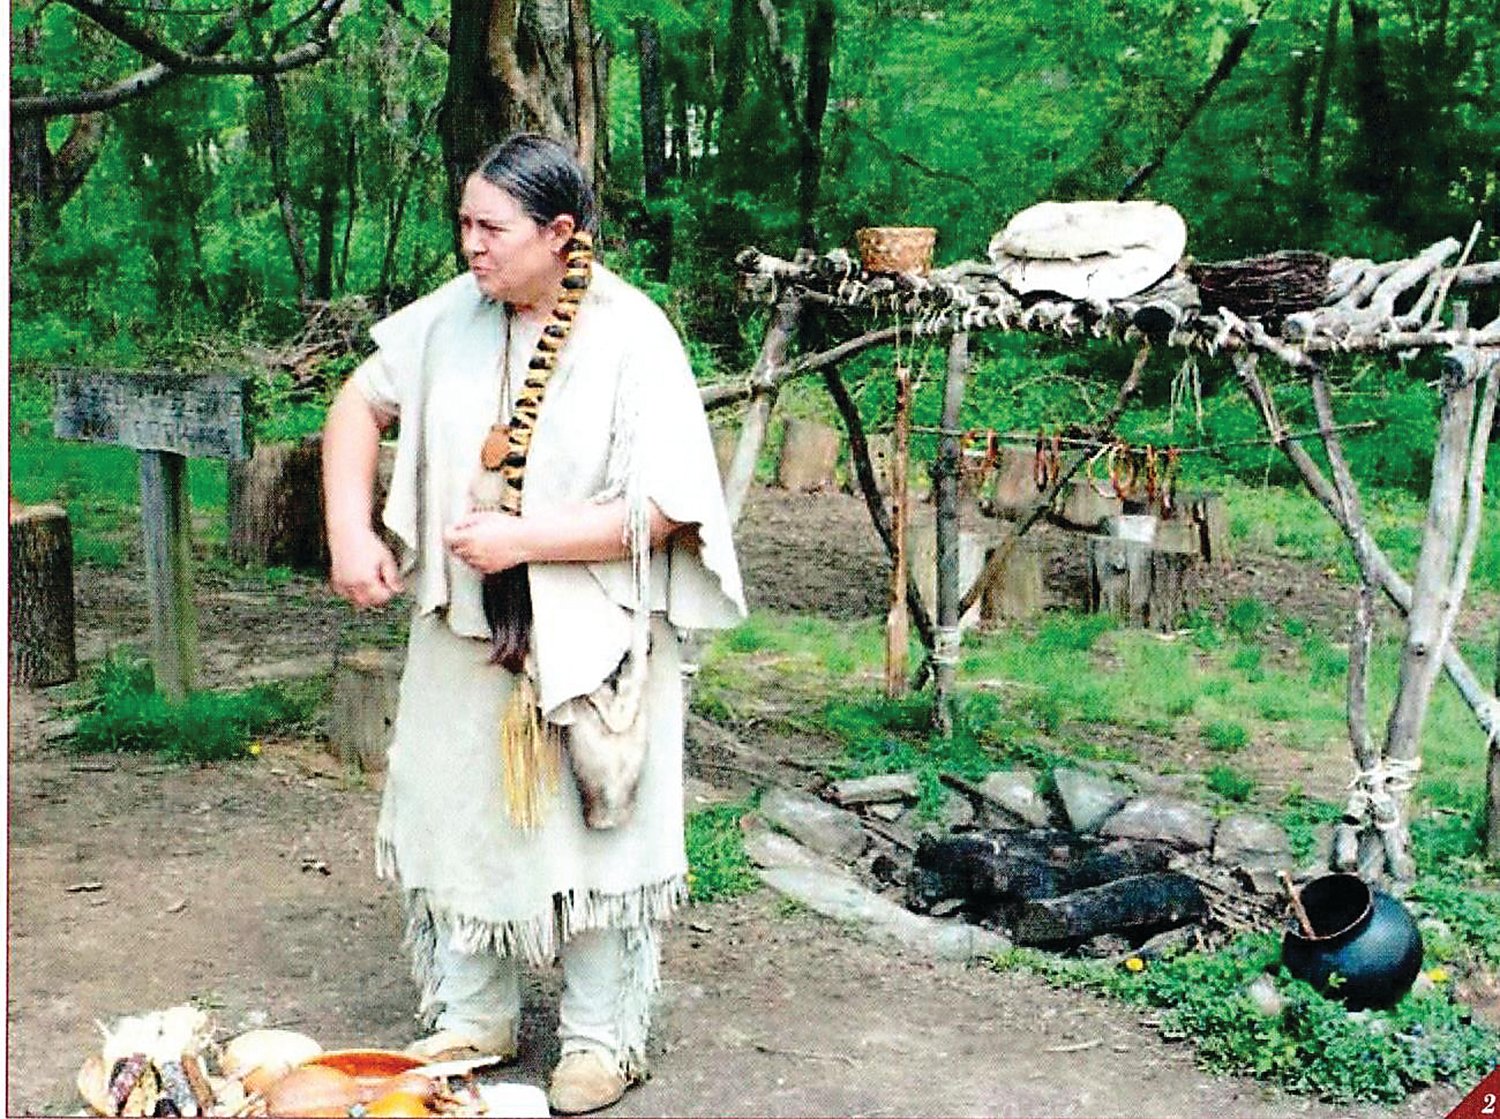 A volunteer talks about native cooking at the Lenape Village at the Churchville Nature Center. Photograph by Kathryn Finegan Clark.